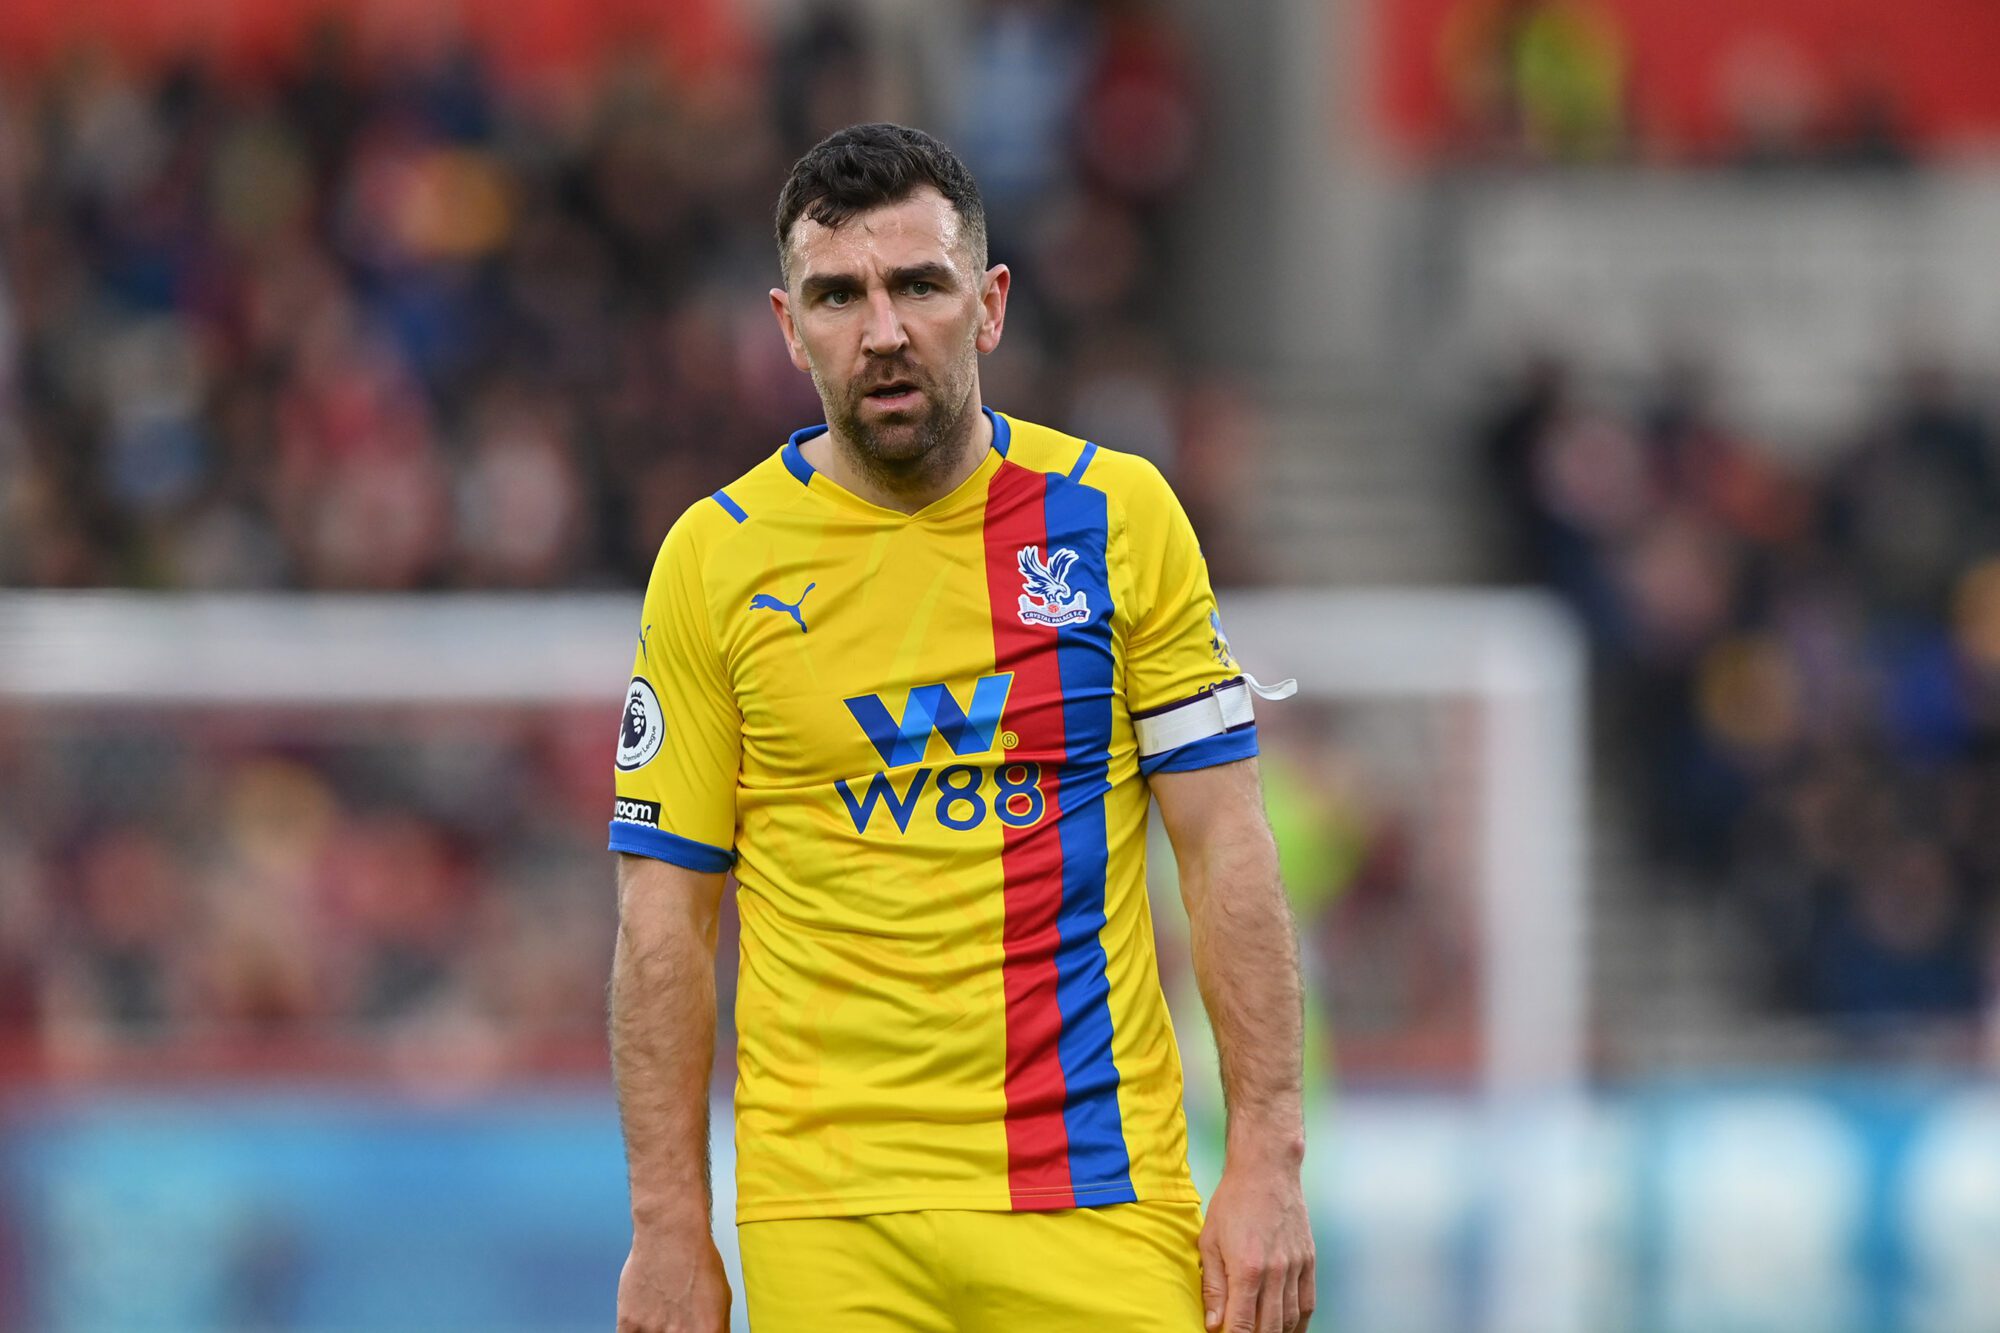 Does Patrick Vieira think James McArthur will play this season? Palace boss answers that question – South London News